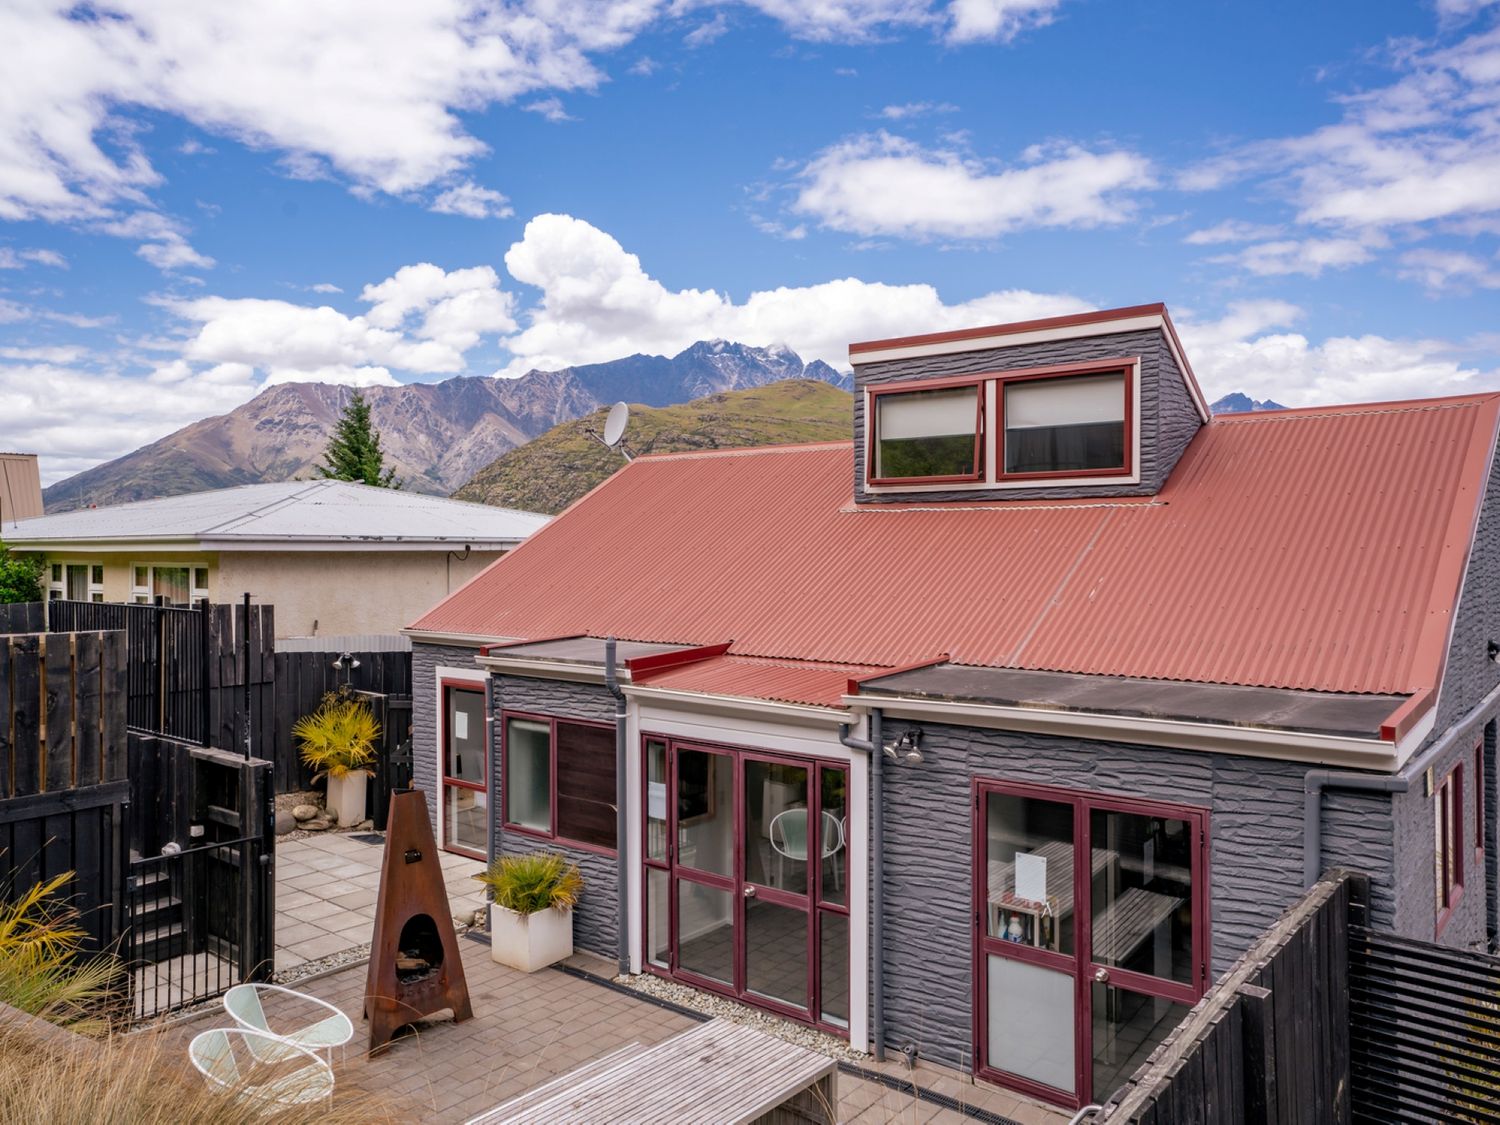 Cherie's Lakeside - Queenstown Holiday Home -  - 1153355 - photo 1